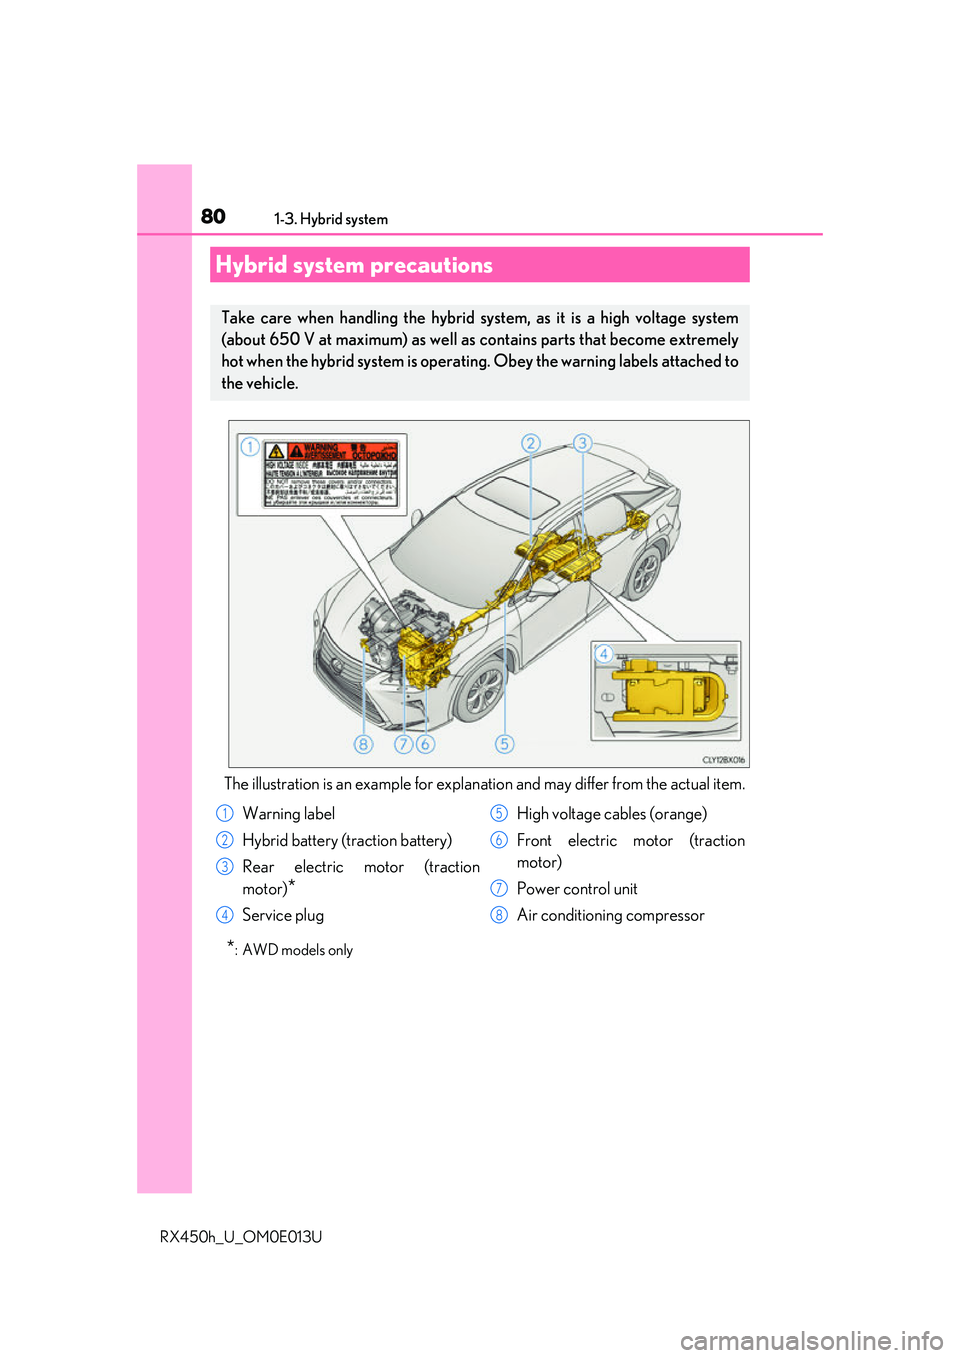 LEXUS RX450H 2016  Owners Manual 801-3. Hybrid system
RX450h_U_OM0E013U
The illustration is an example for explanation and may differ from the actual item.
*:AWD models only
Hybrid system precautions
Take care when handling the hybri